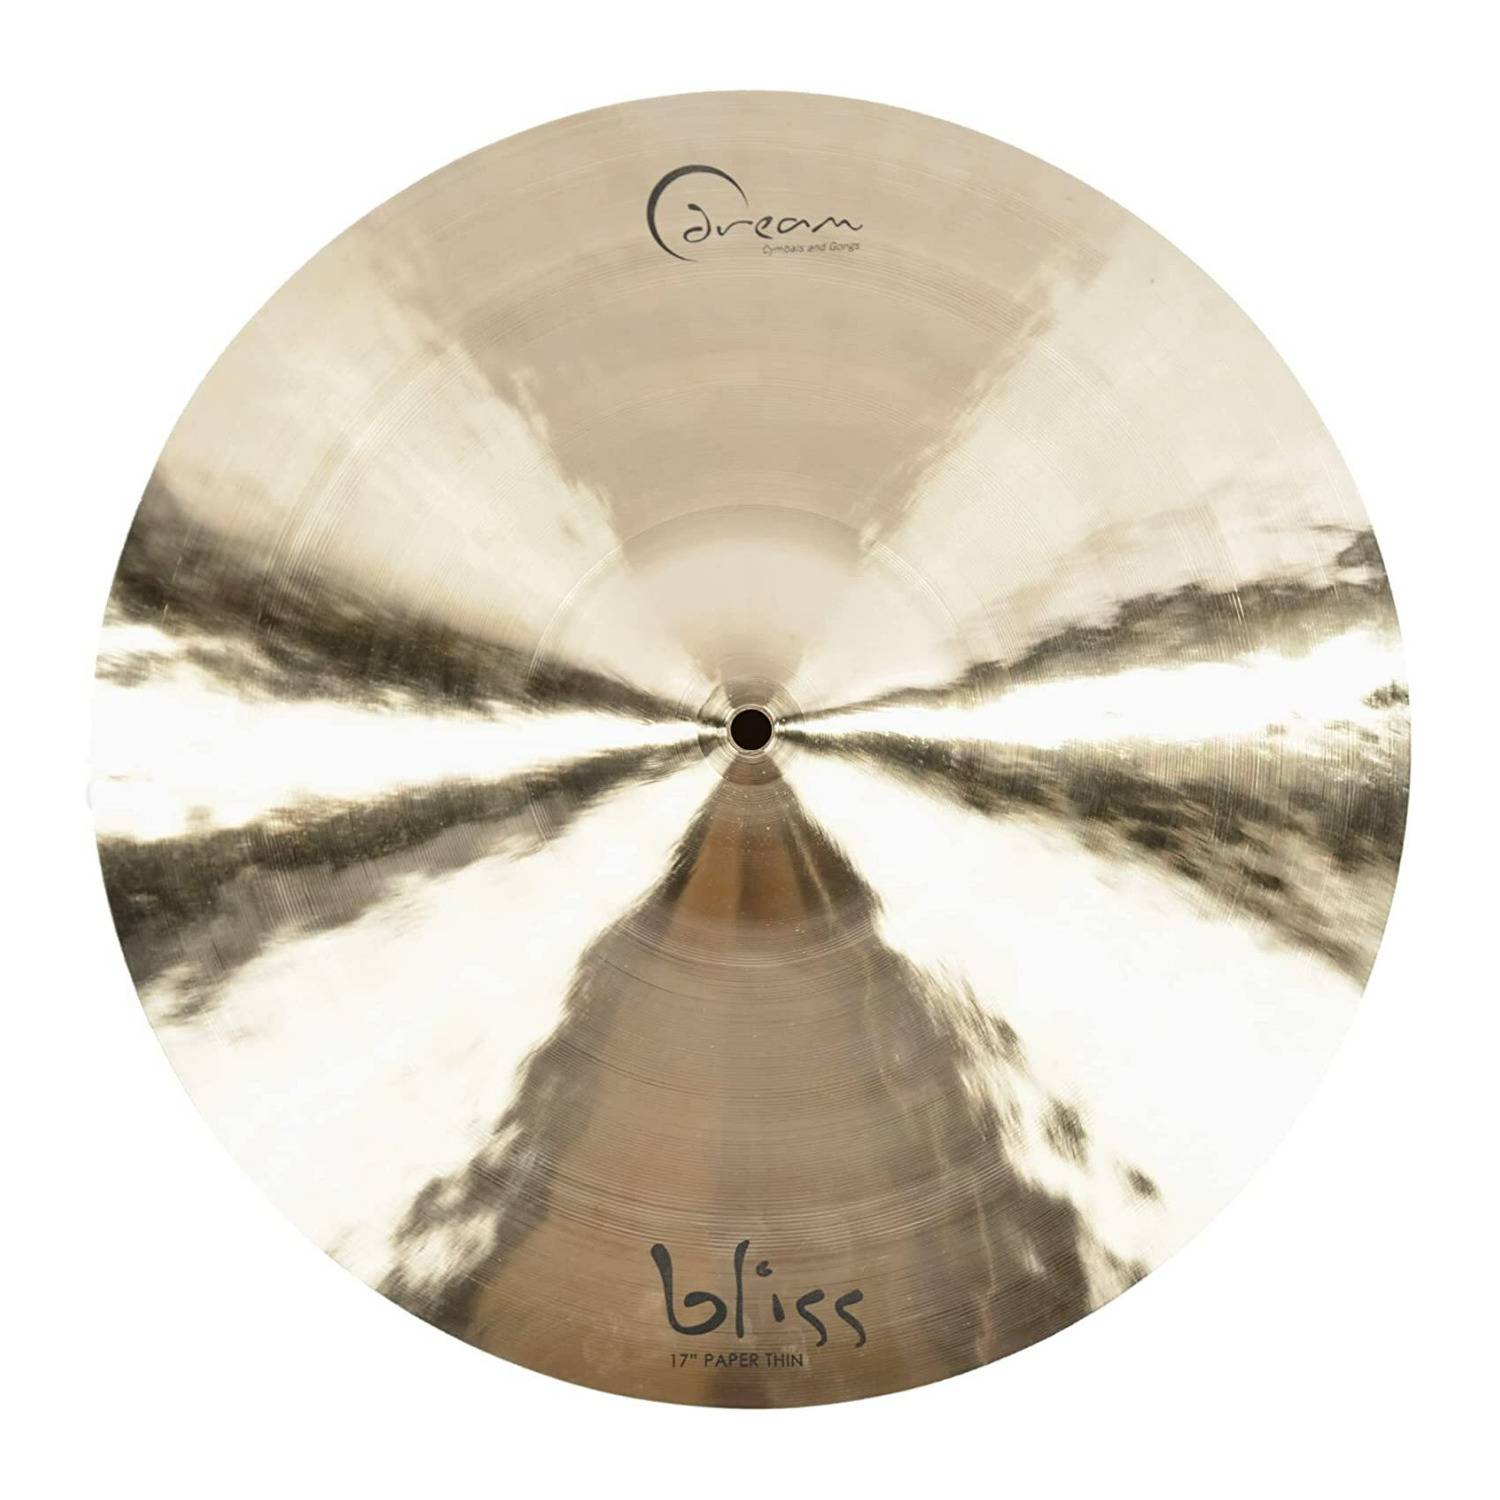 Dream Bliss 17-Inch Paper Thin Crash, Dark Undertones, Hand Forged and Hammered Cymbal